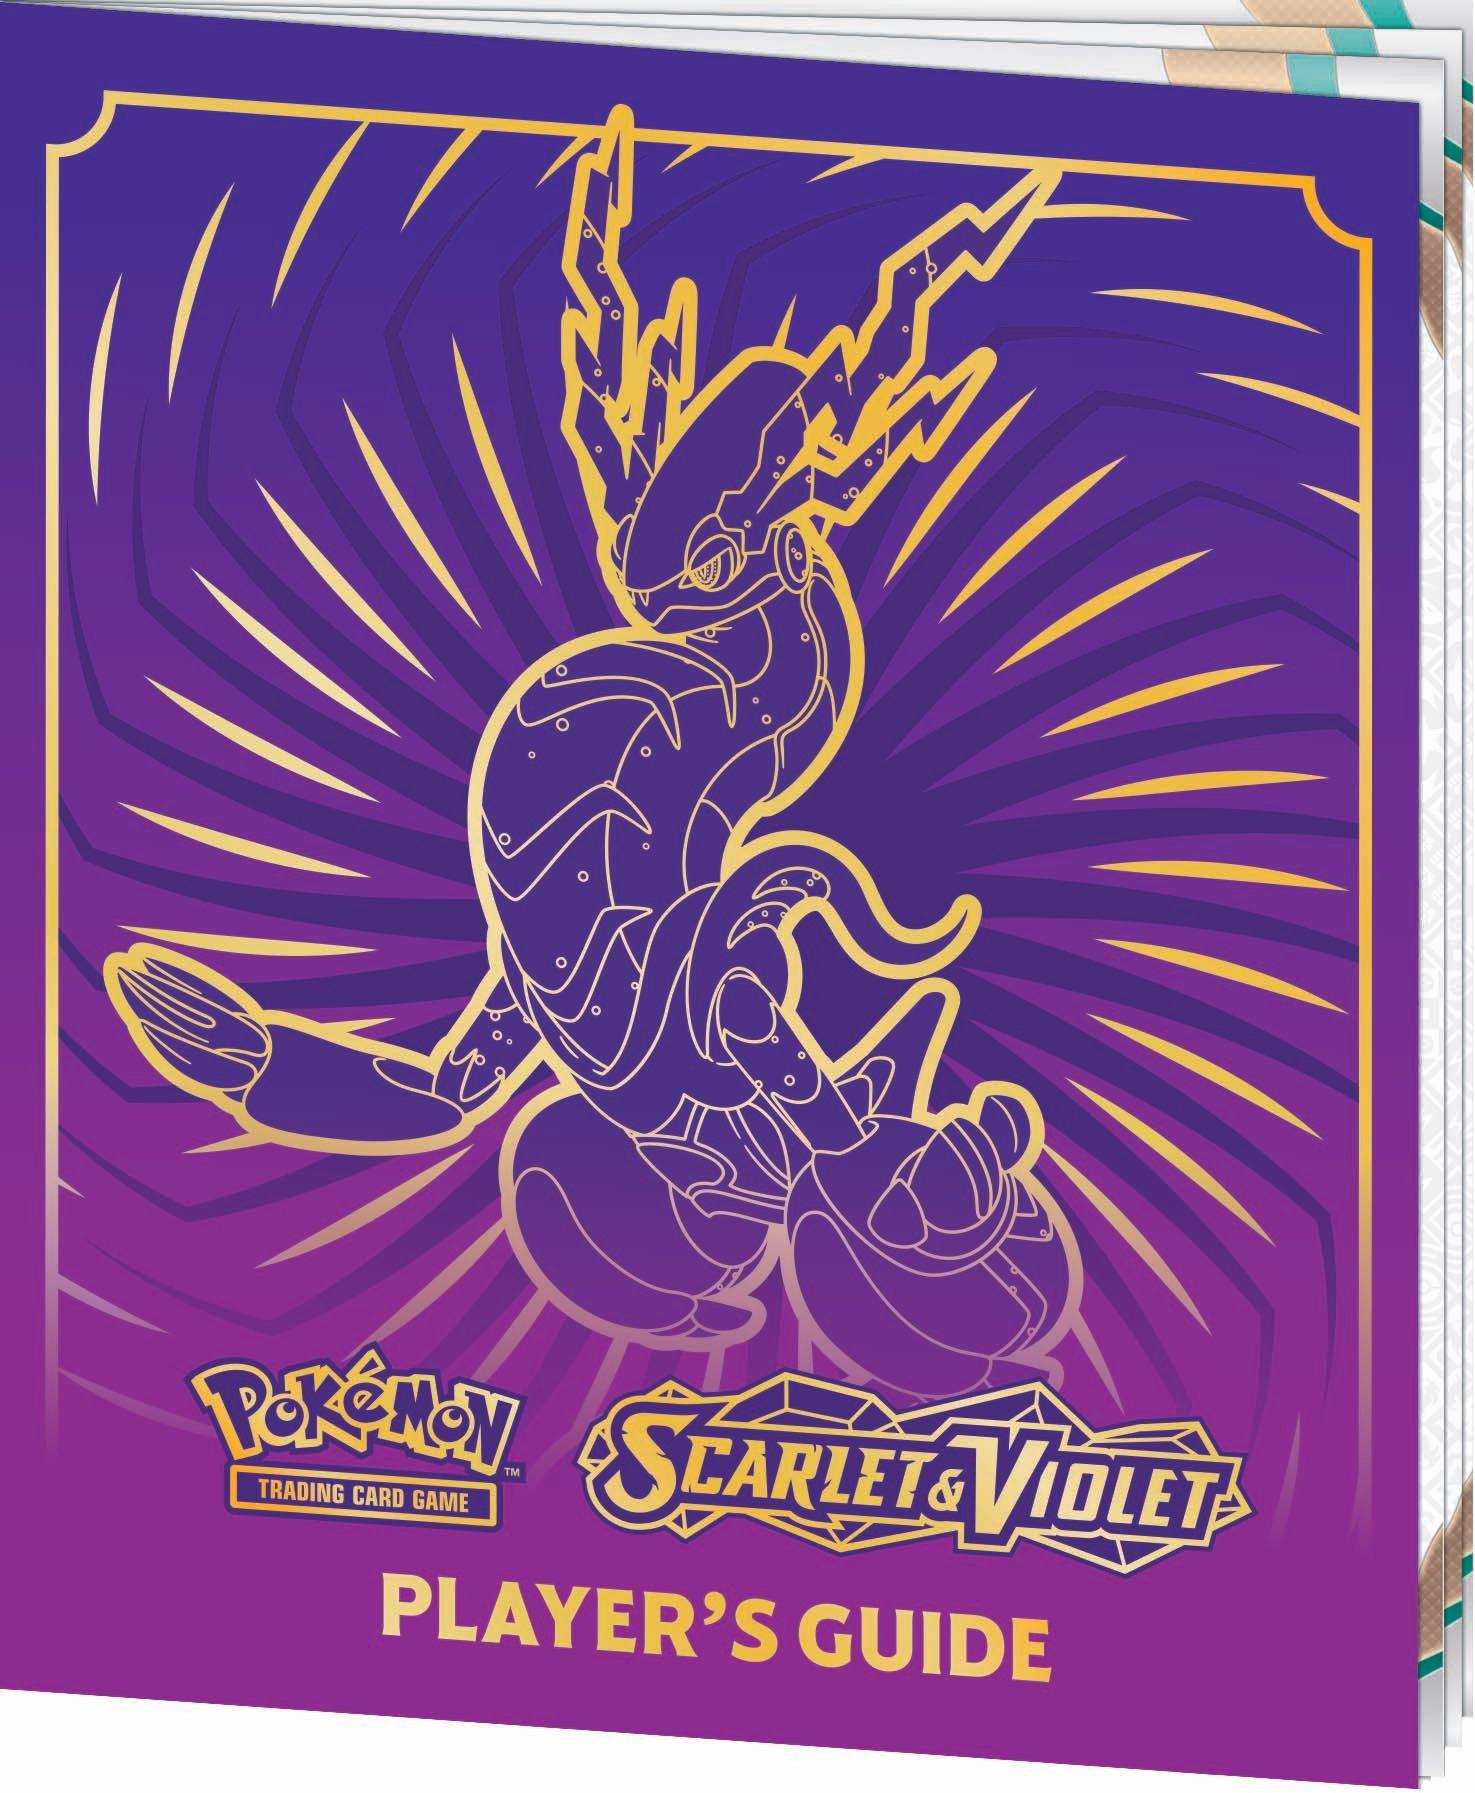 Pokemon Trading Card Game: Scarlet and Violet Elite Trainer Box (Styles May Vary)